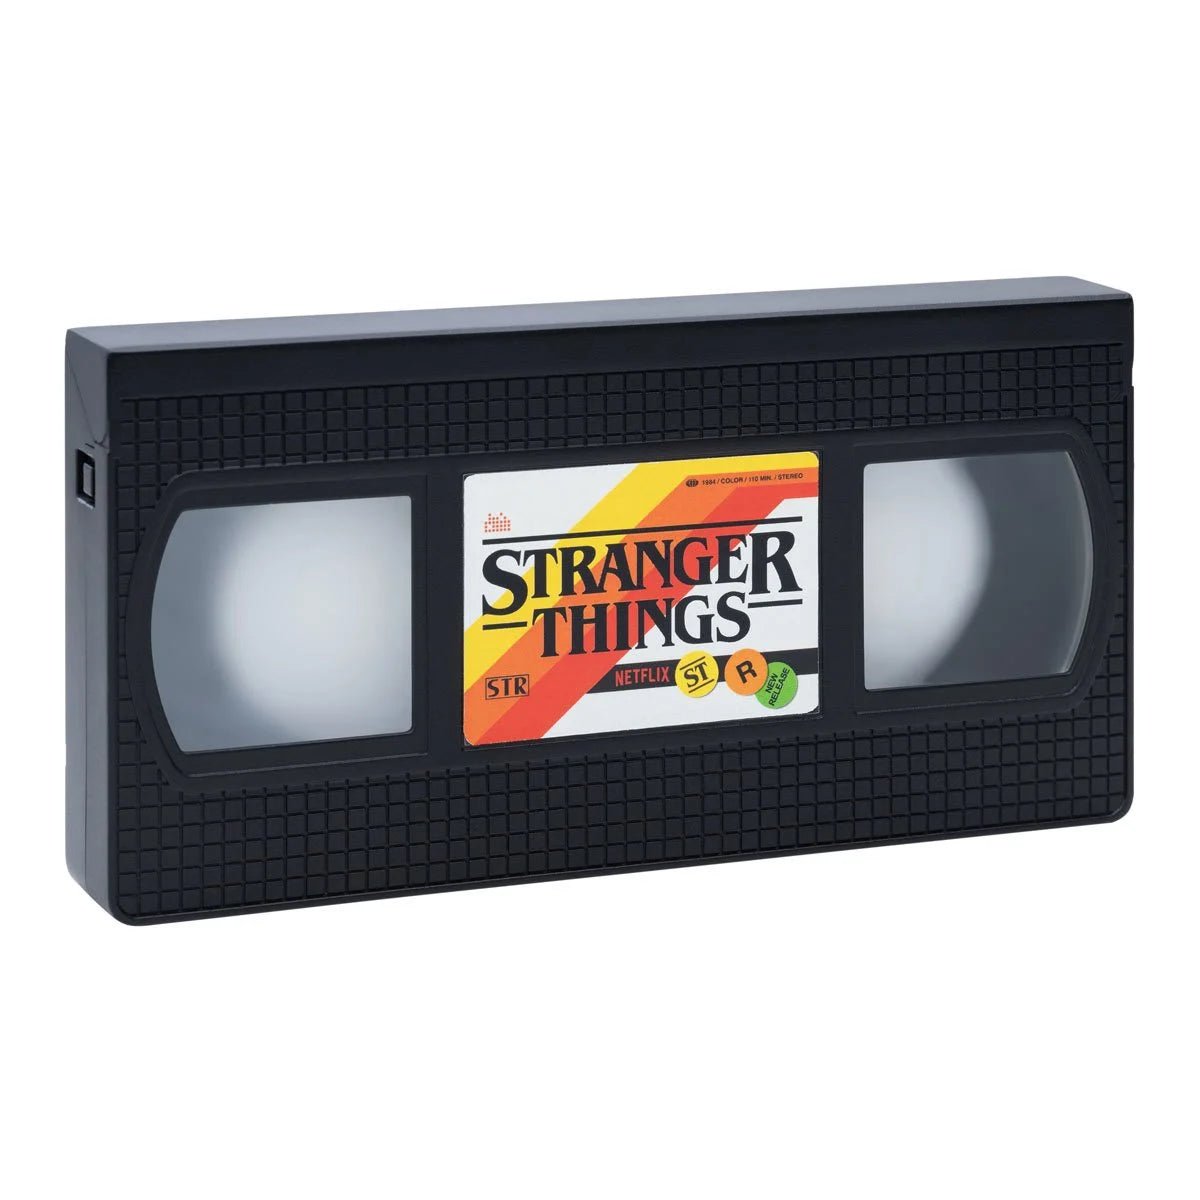 Stranger Things VHS Logo Light by Paladone - Simon's Collectibles